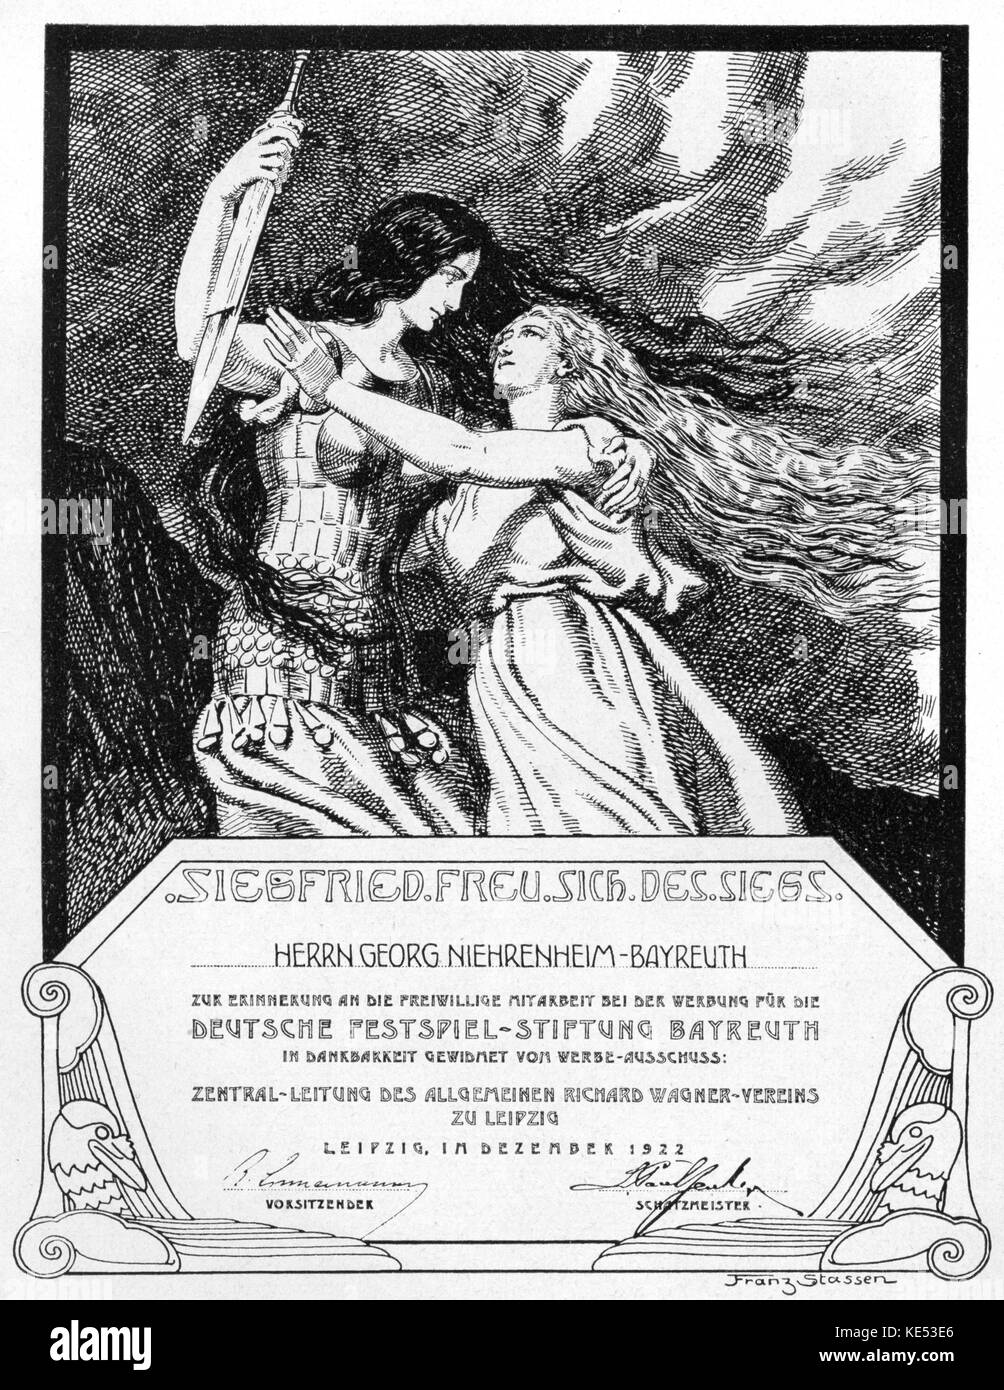 Richard Wagner's 'The Ring of the Nibelungen' (Der Ring des Nibelungen). 'Siegfried rejoices over his victory. Illustration by Franz Staffen. RW: German composer & author, 22 May 1813 - 13 February 1883. Stock Photo